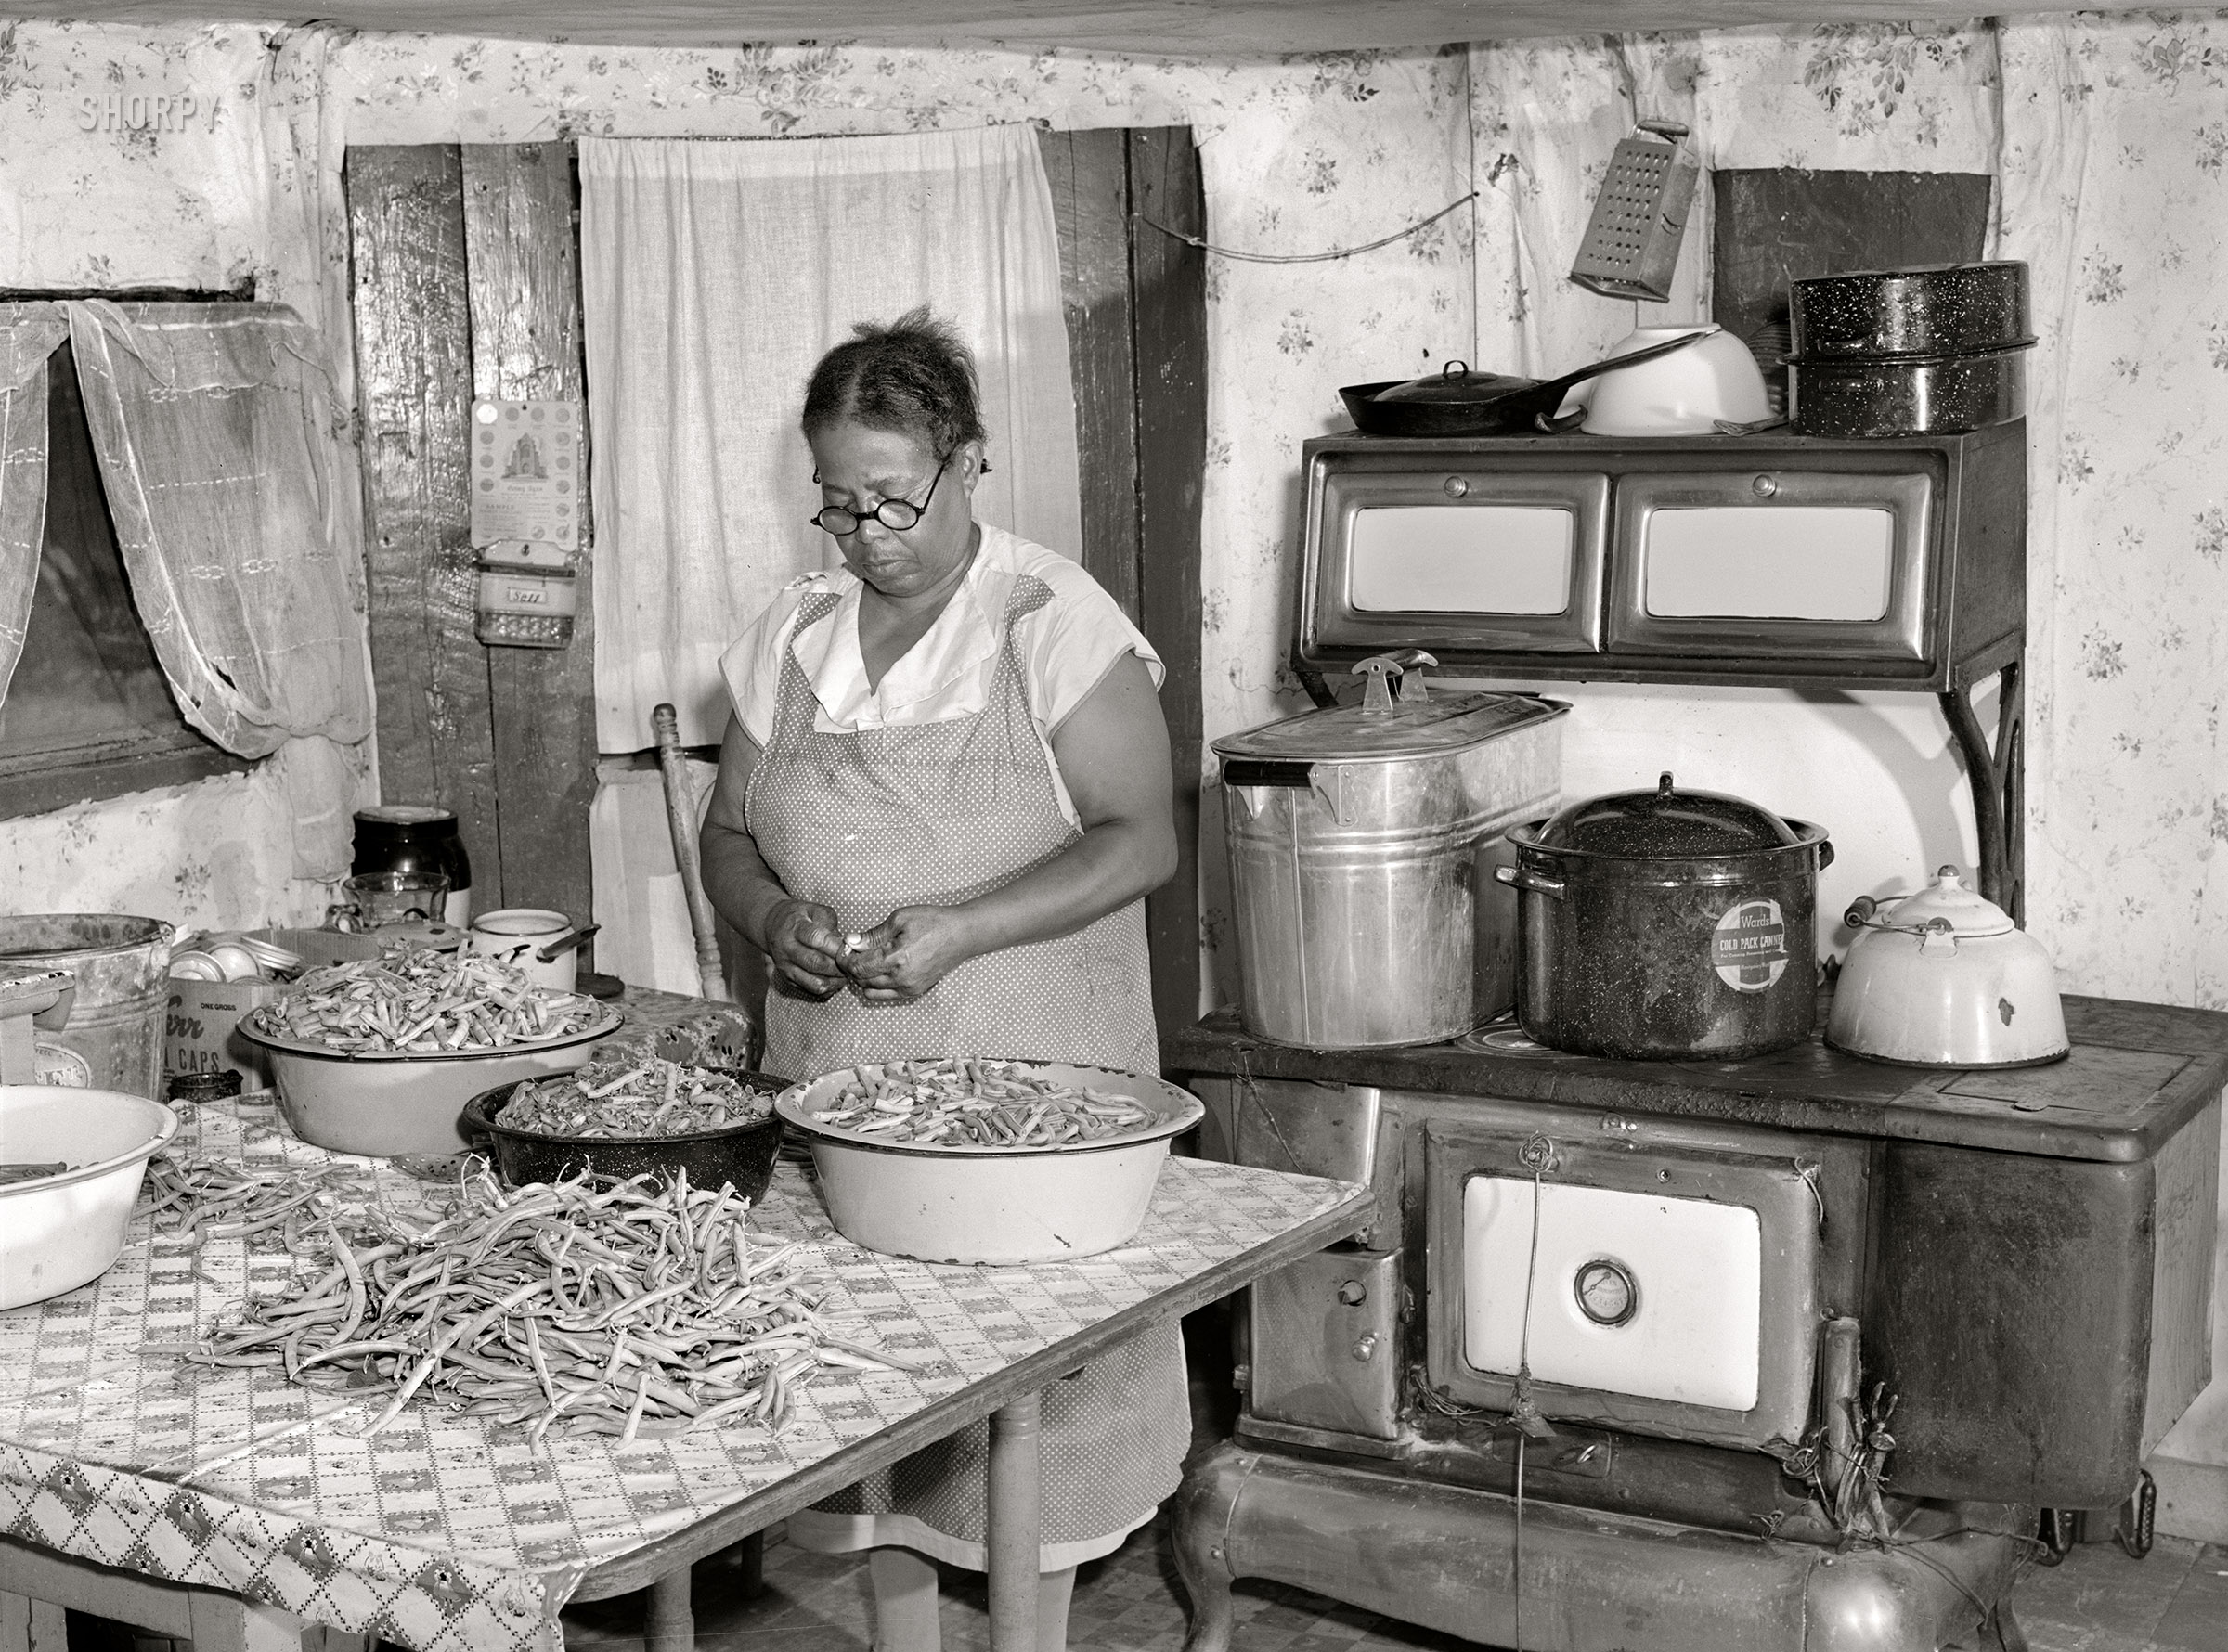 September 1940. Saint Mary's County, Maryland. "Mrs. Eugene Smith, FSA borrower, canning string beans." Photo by John Vachon for the Farm Security Administration. View full size.